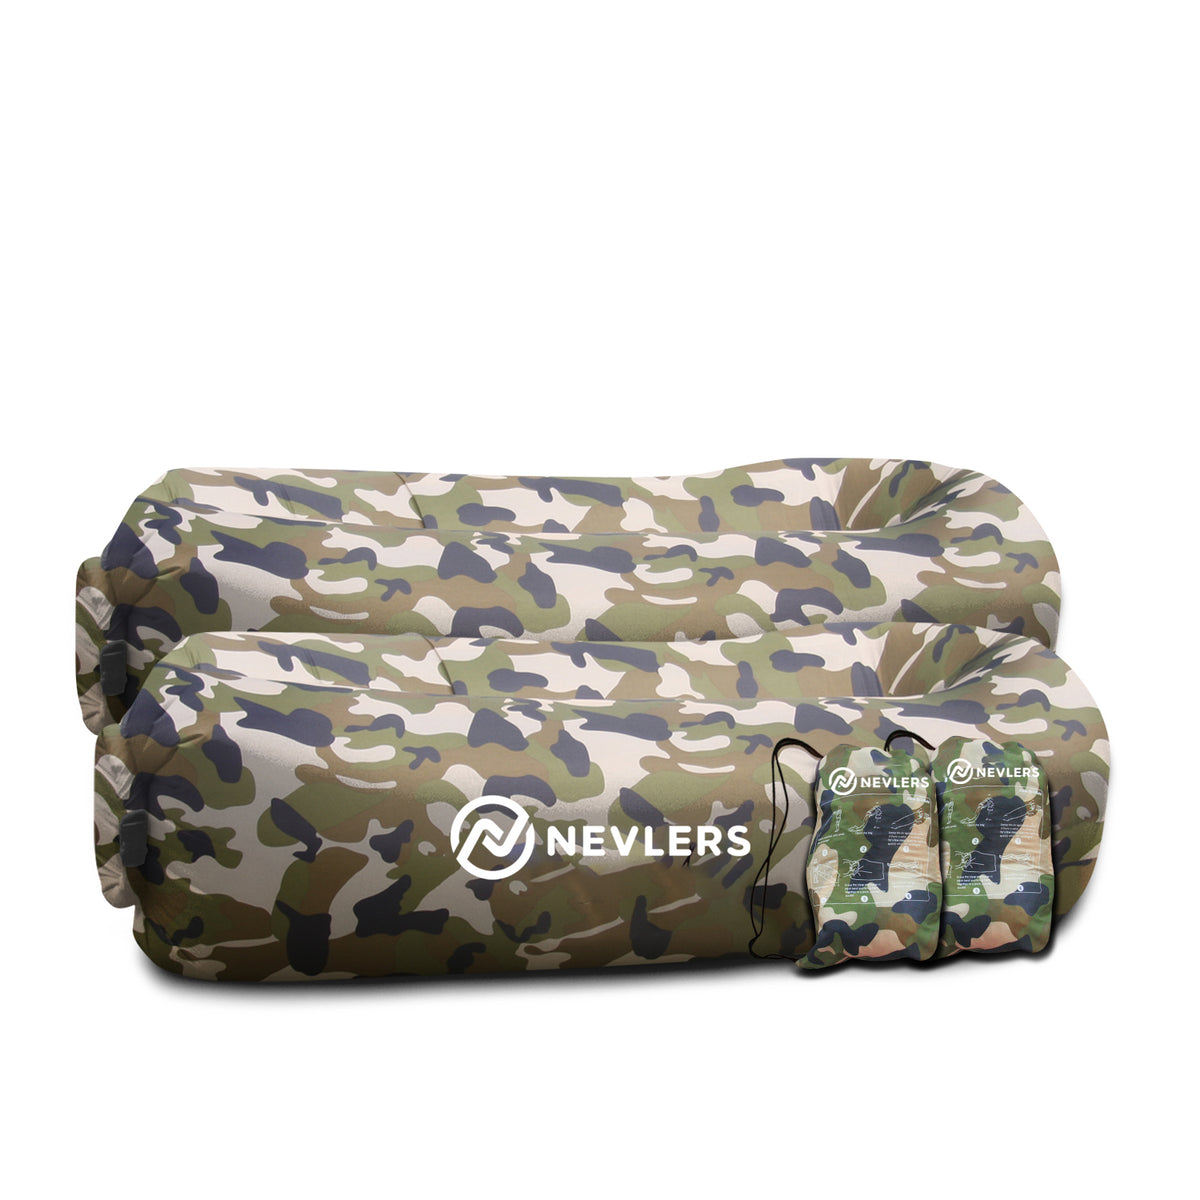 Inflatable Loungers - Green Camo - 2 Pack